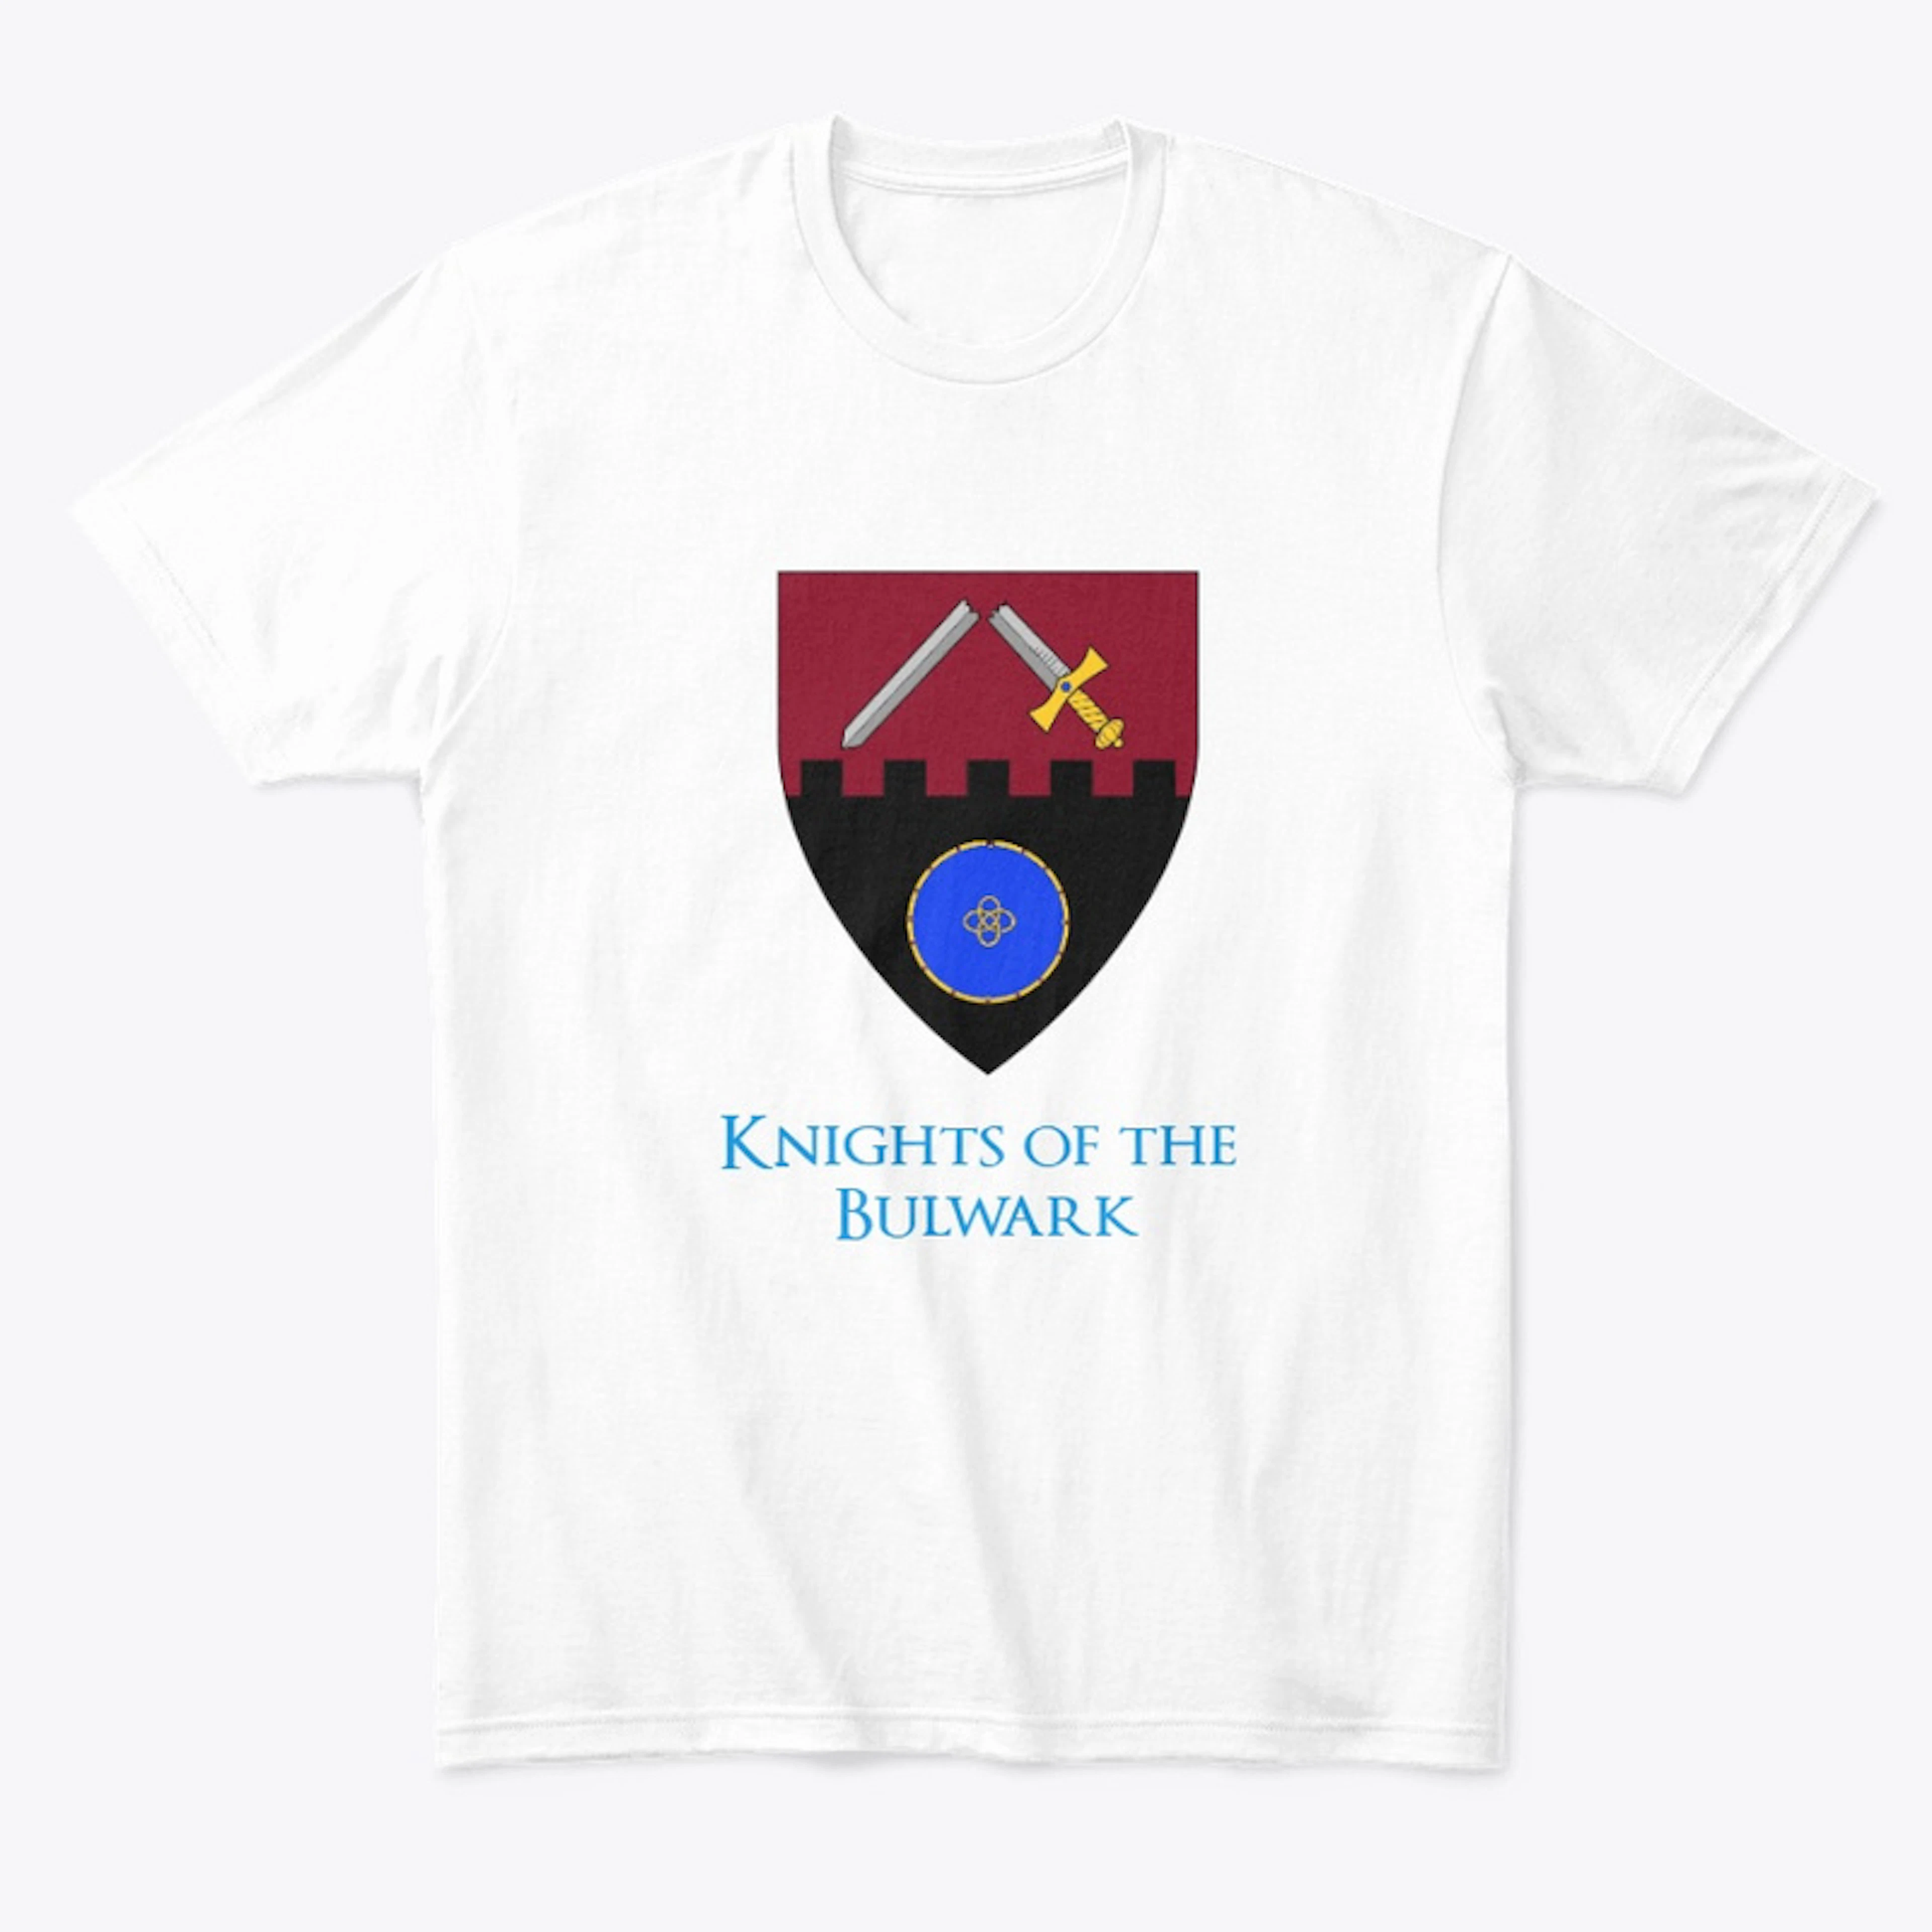 Knights of the Bulwark